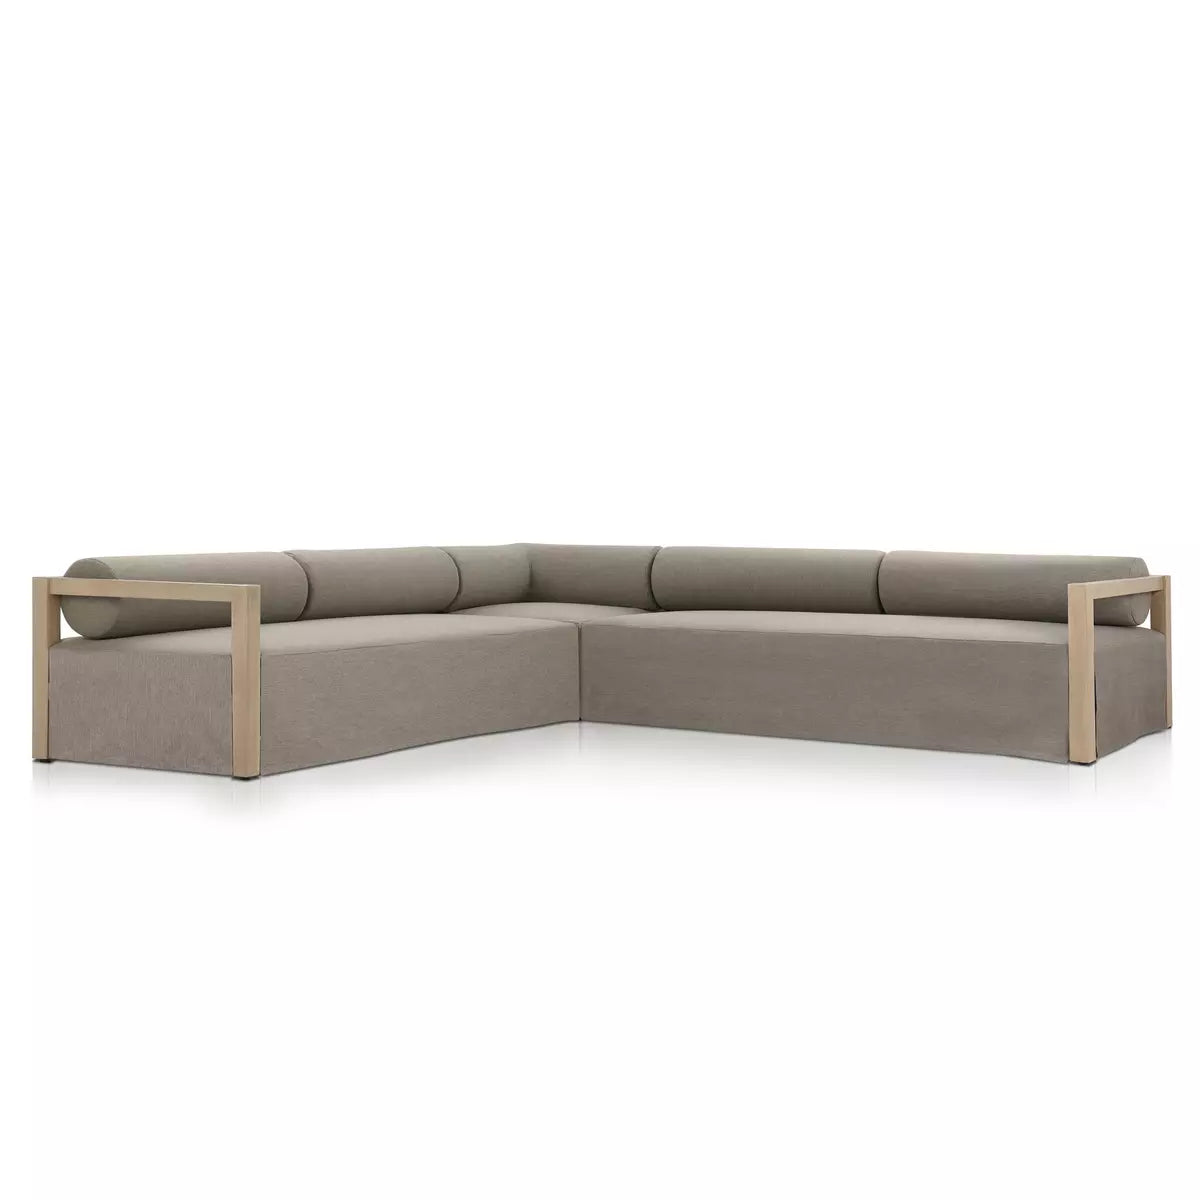 Laskin Outdoor 3Pc Sectional